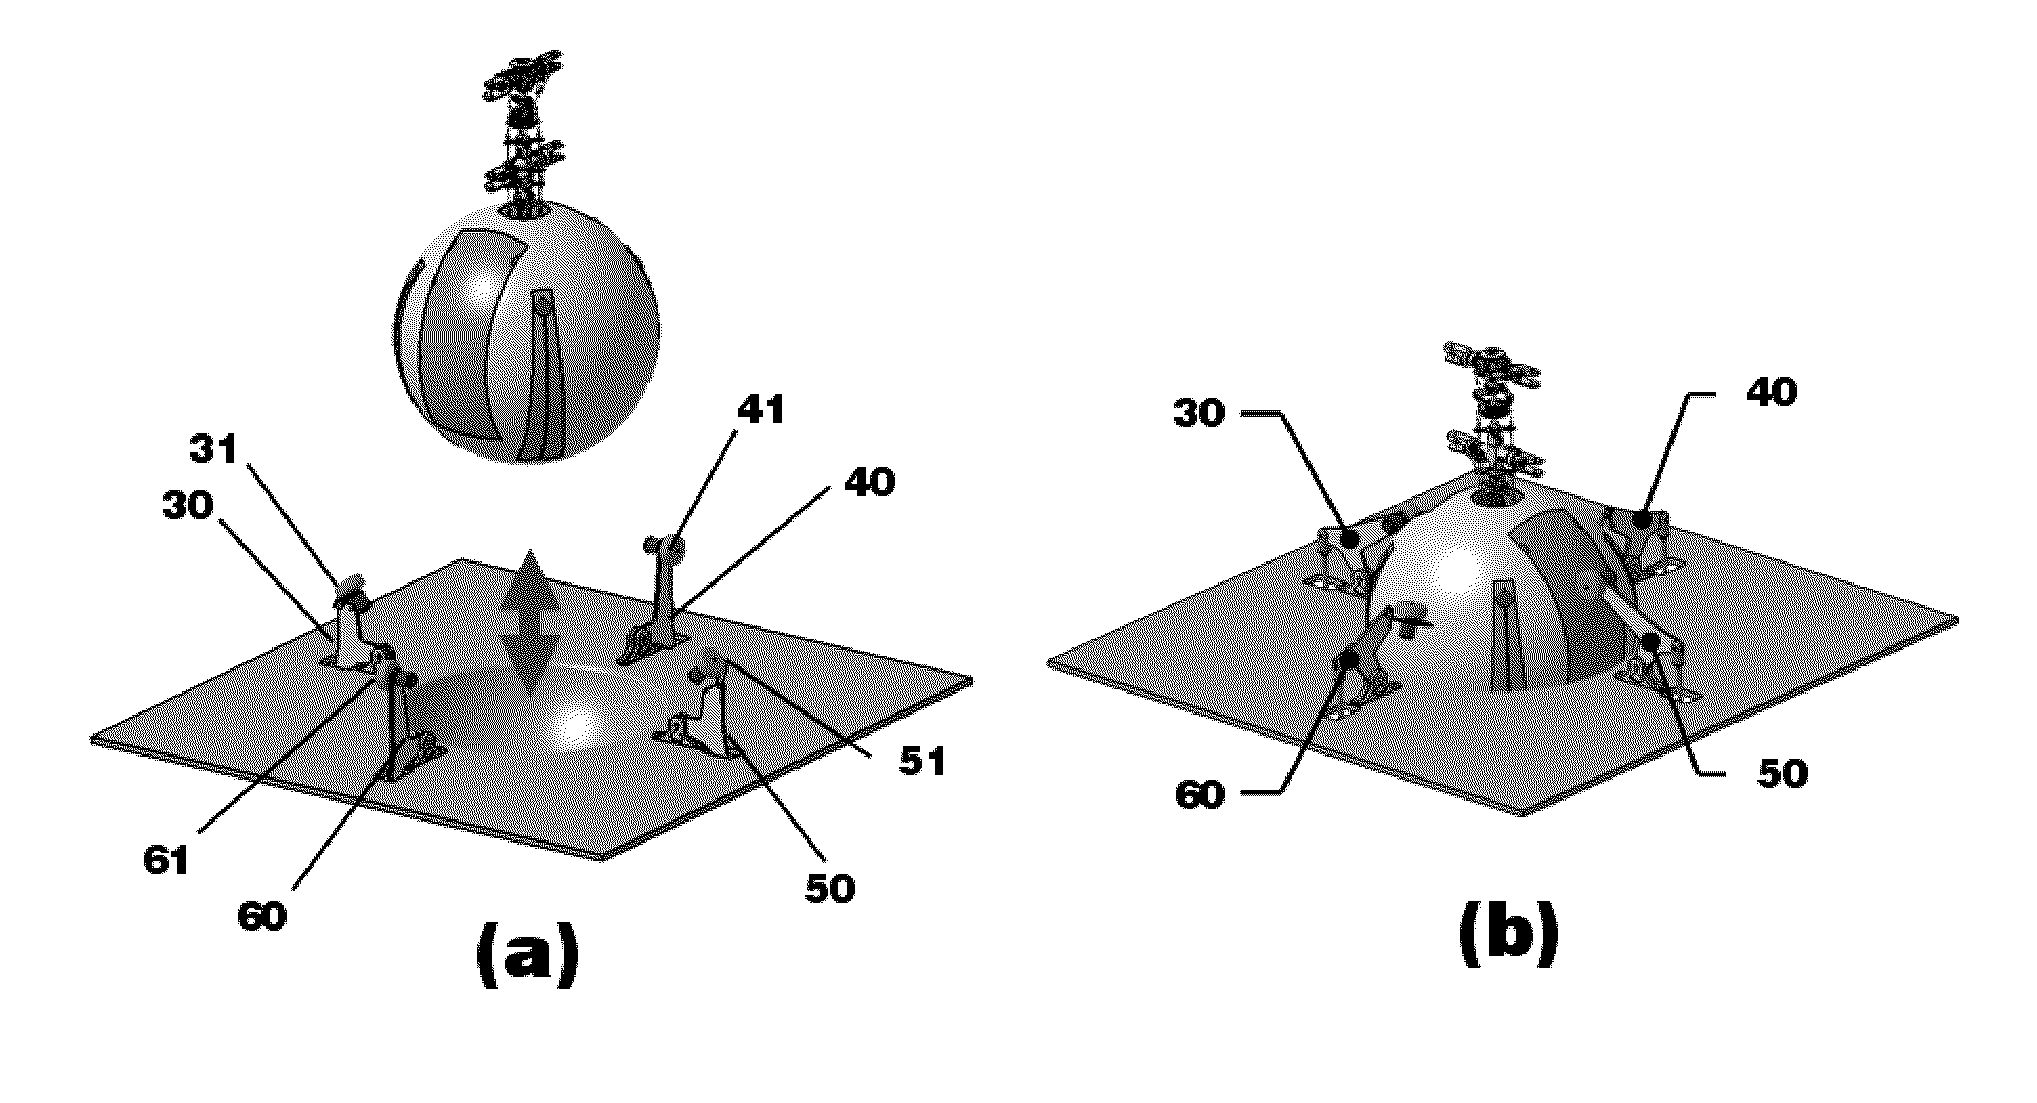 Unmanned aerial vehicle having spherical loading portion and unmanned ground vehicle therefor